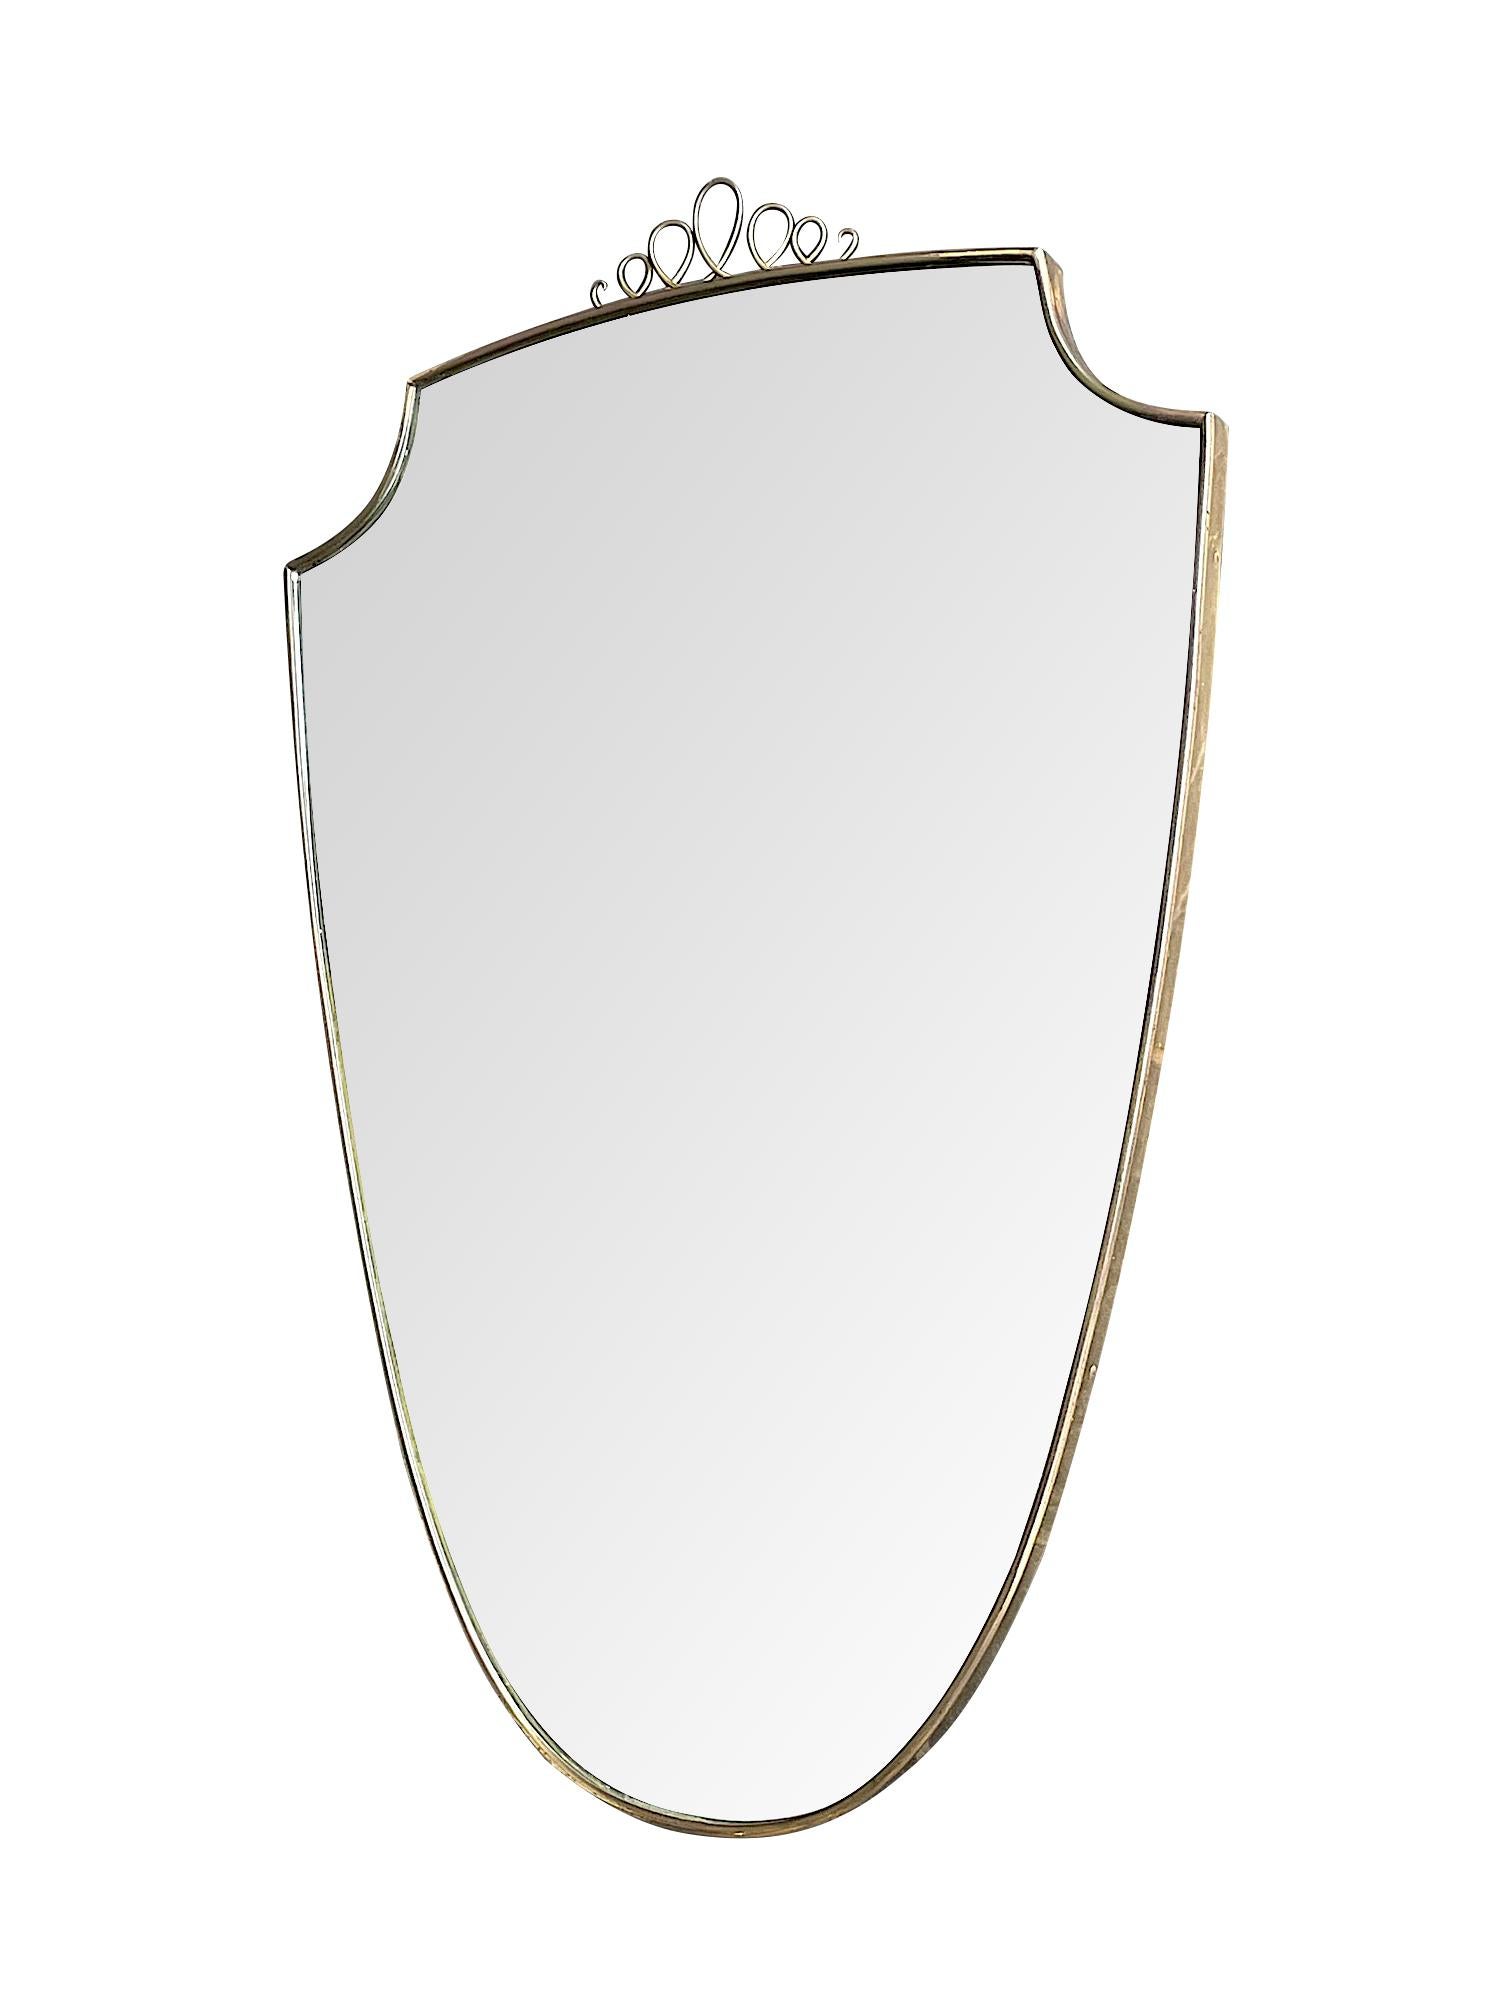 Original 1950s Italian Brass Shield Mirror with Central Decorative Top Detail 3